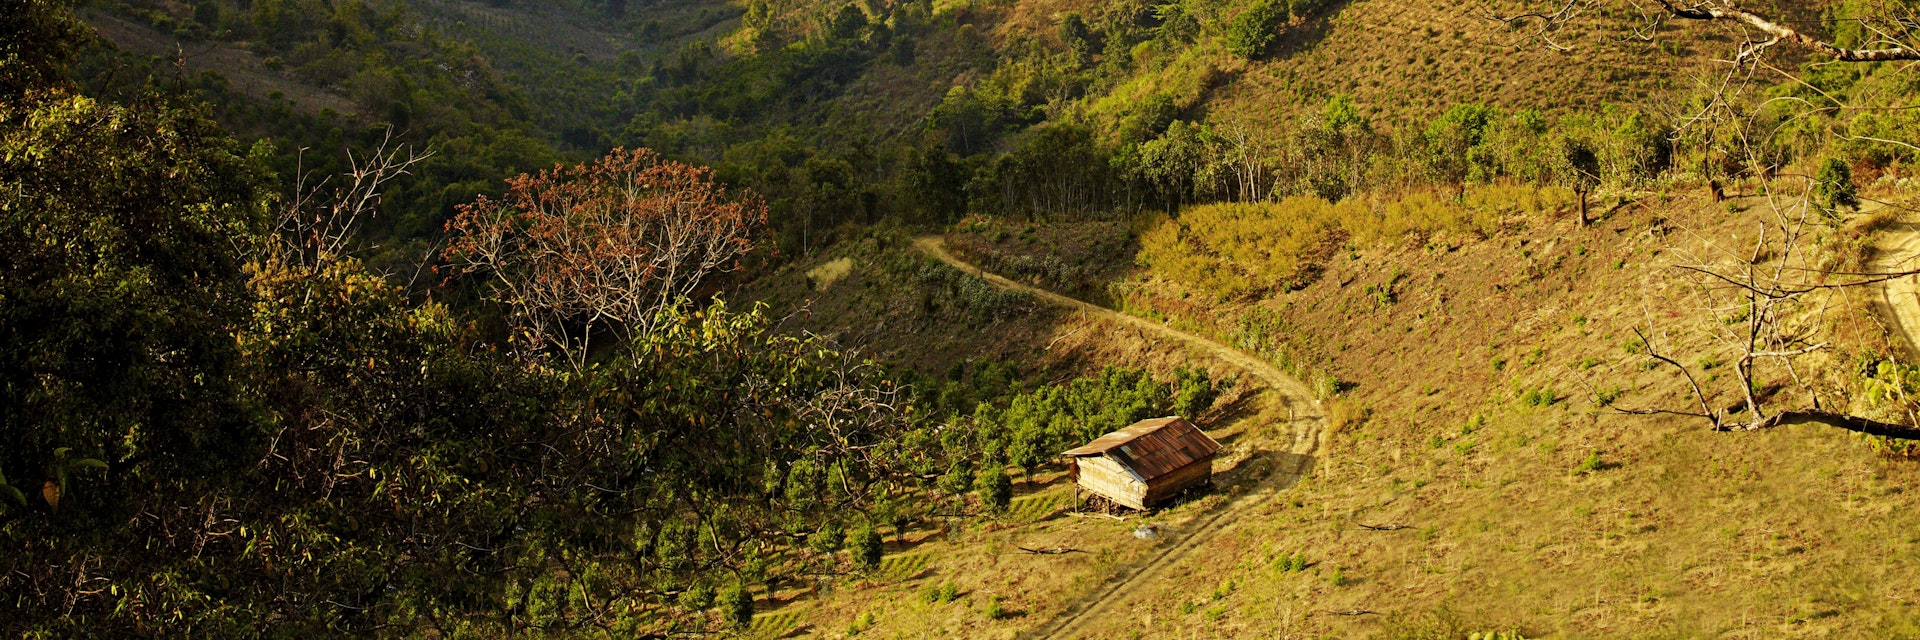 Overview of fruit plantations in the hills above Kalaw.